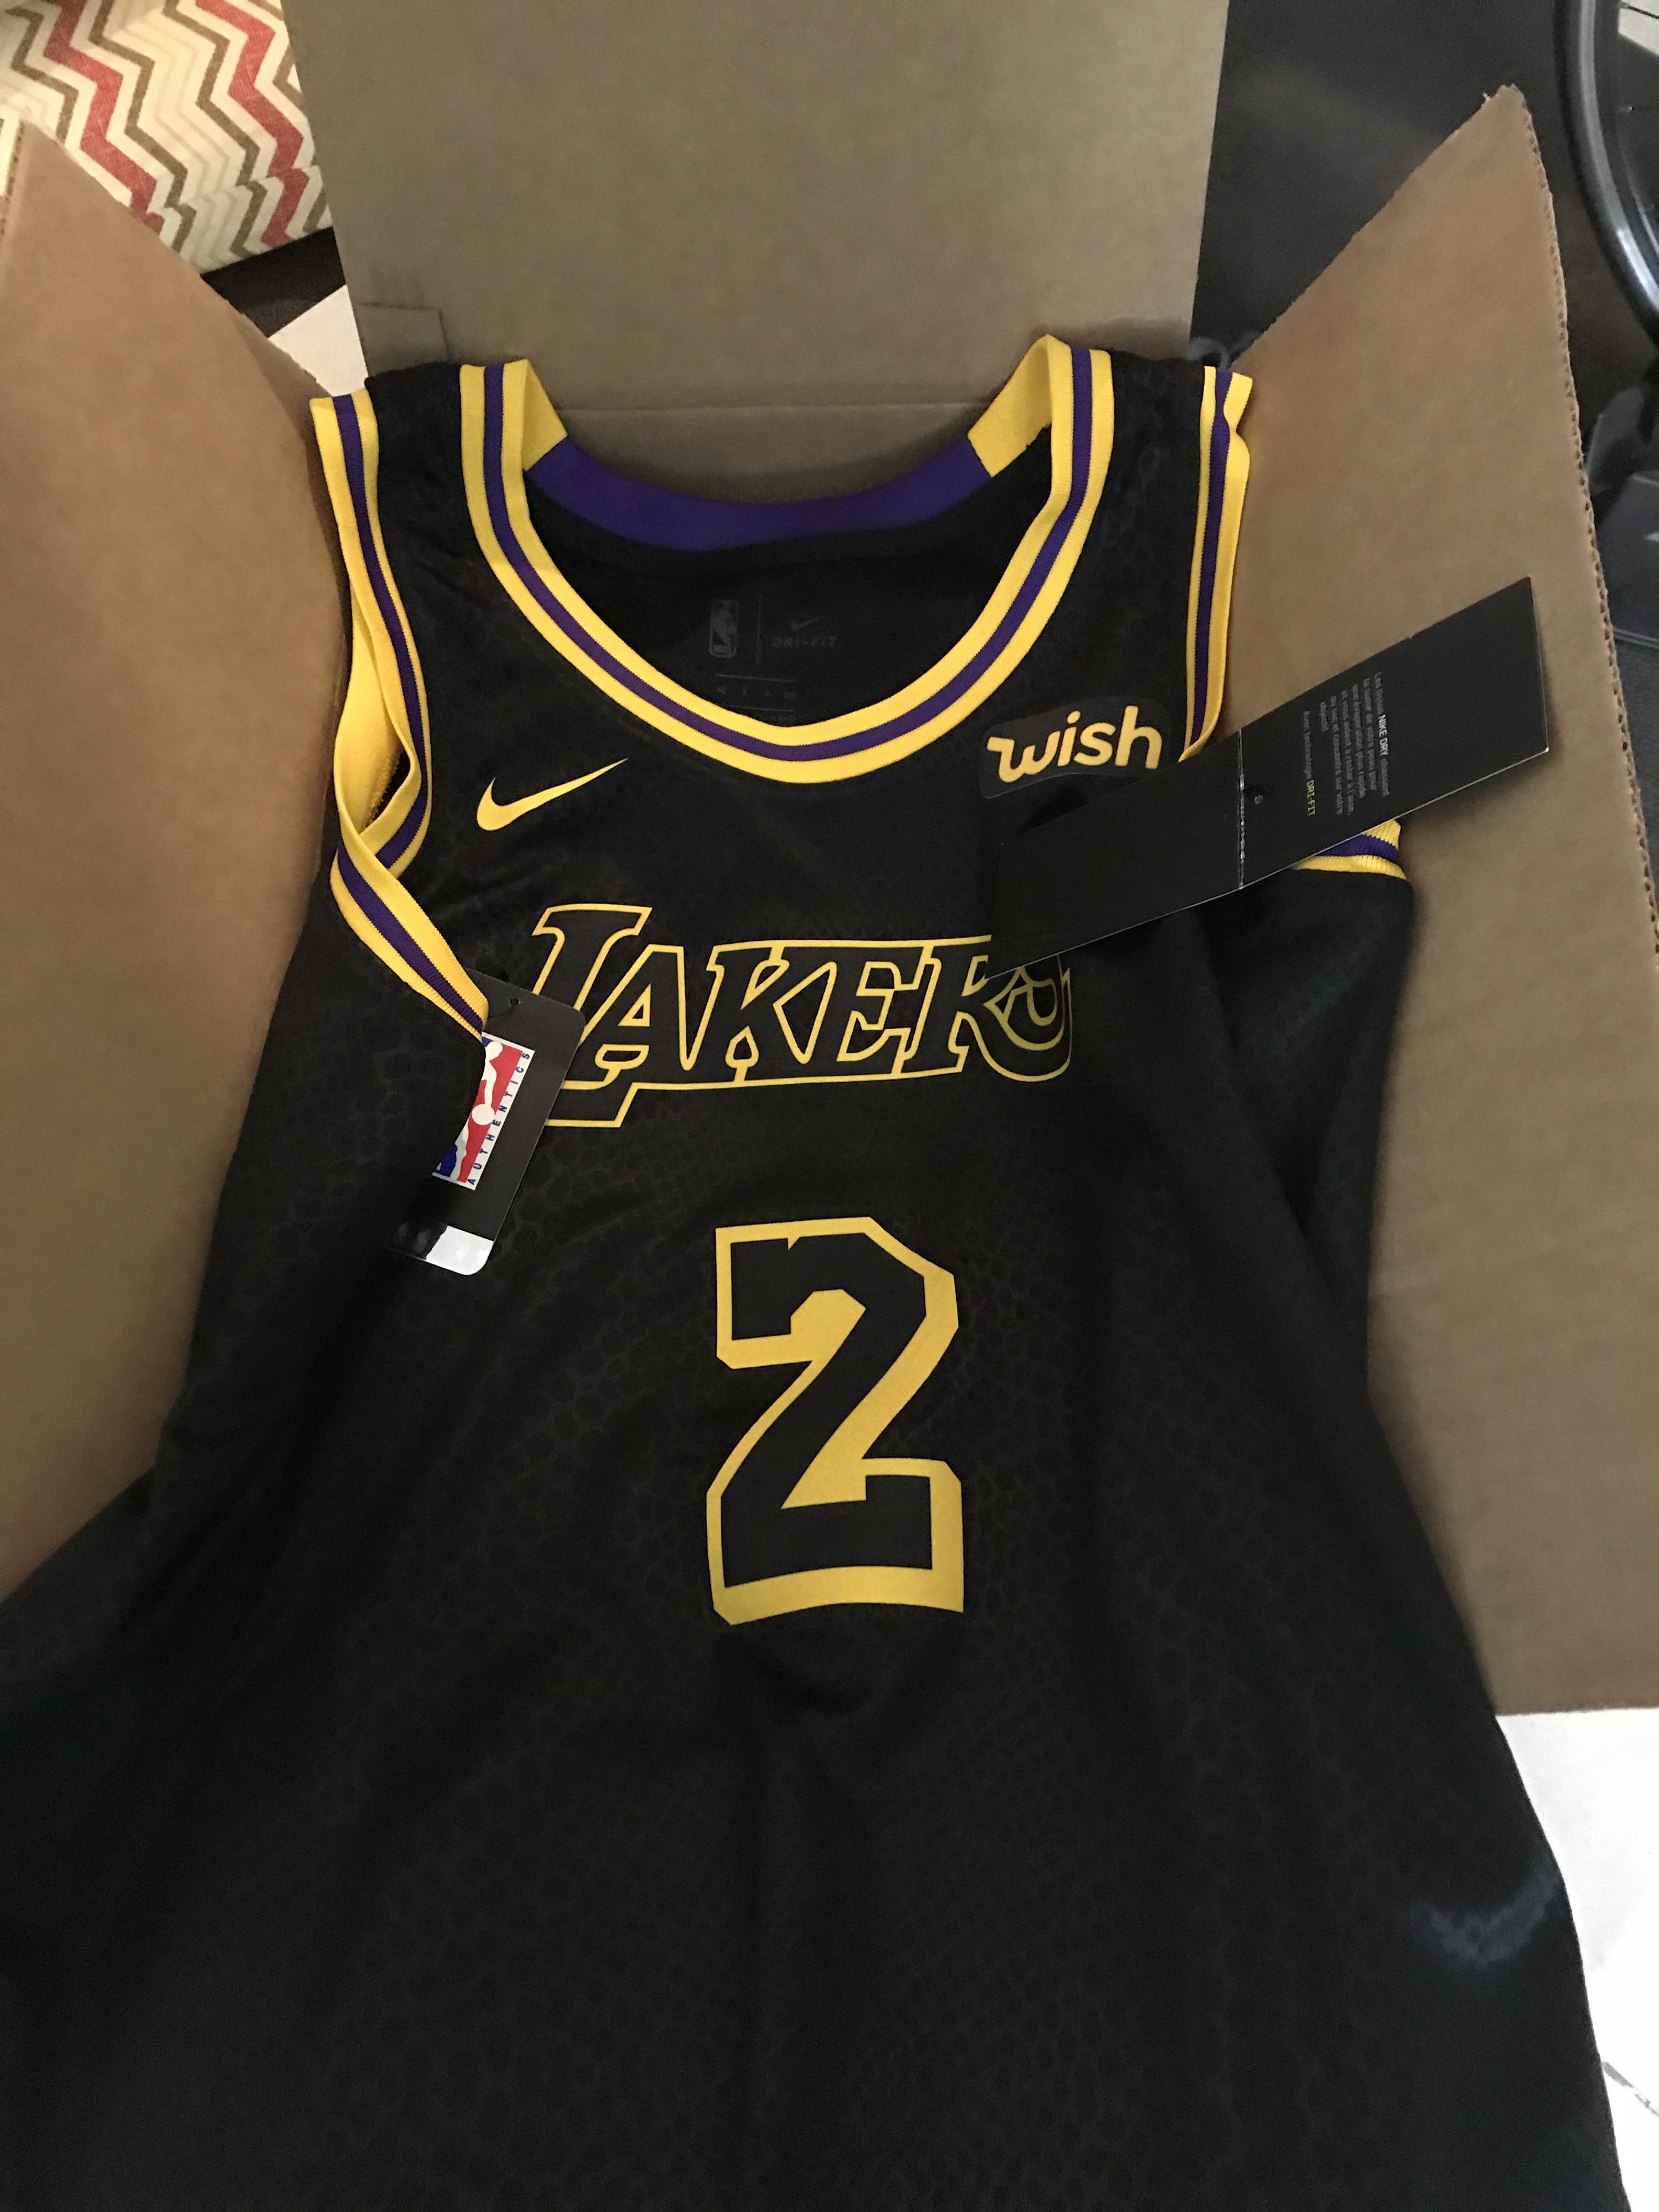 Wish On Lakers Jersey Logo - Just got my Zo City Edition Swingman jersey delivered today! Looks